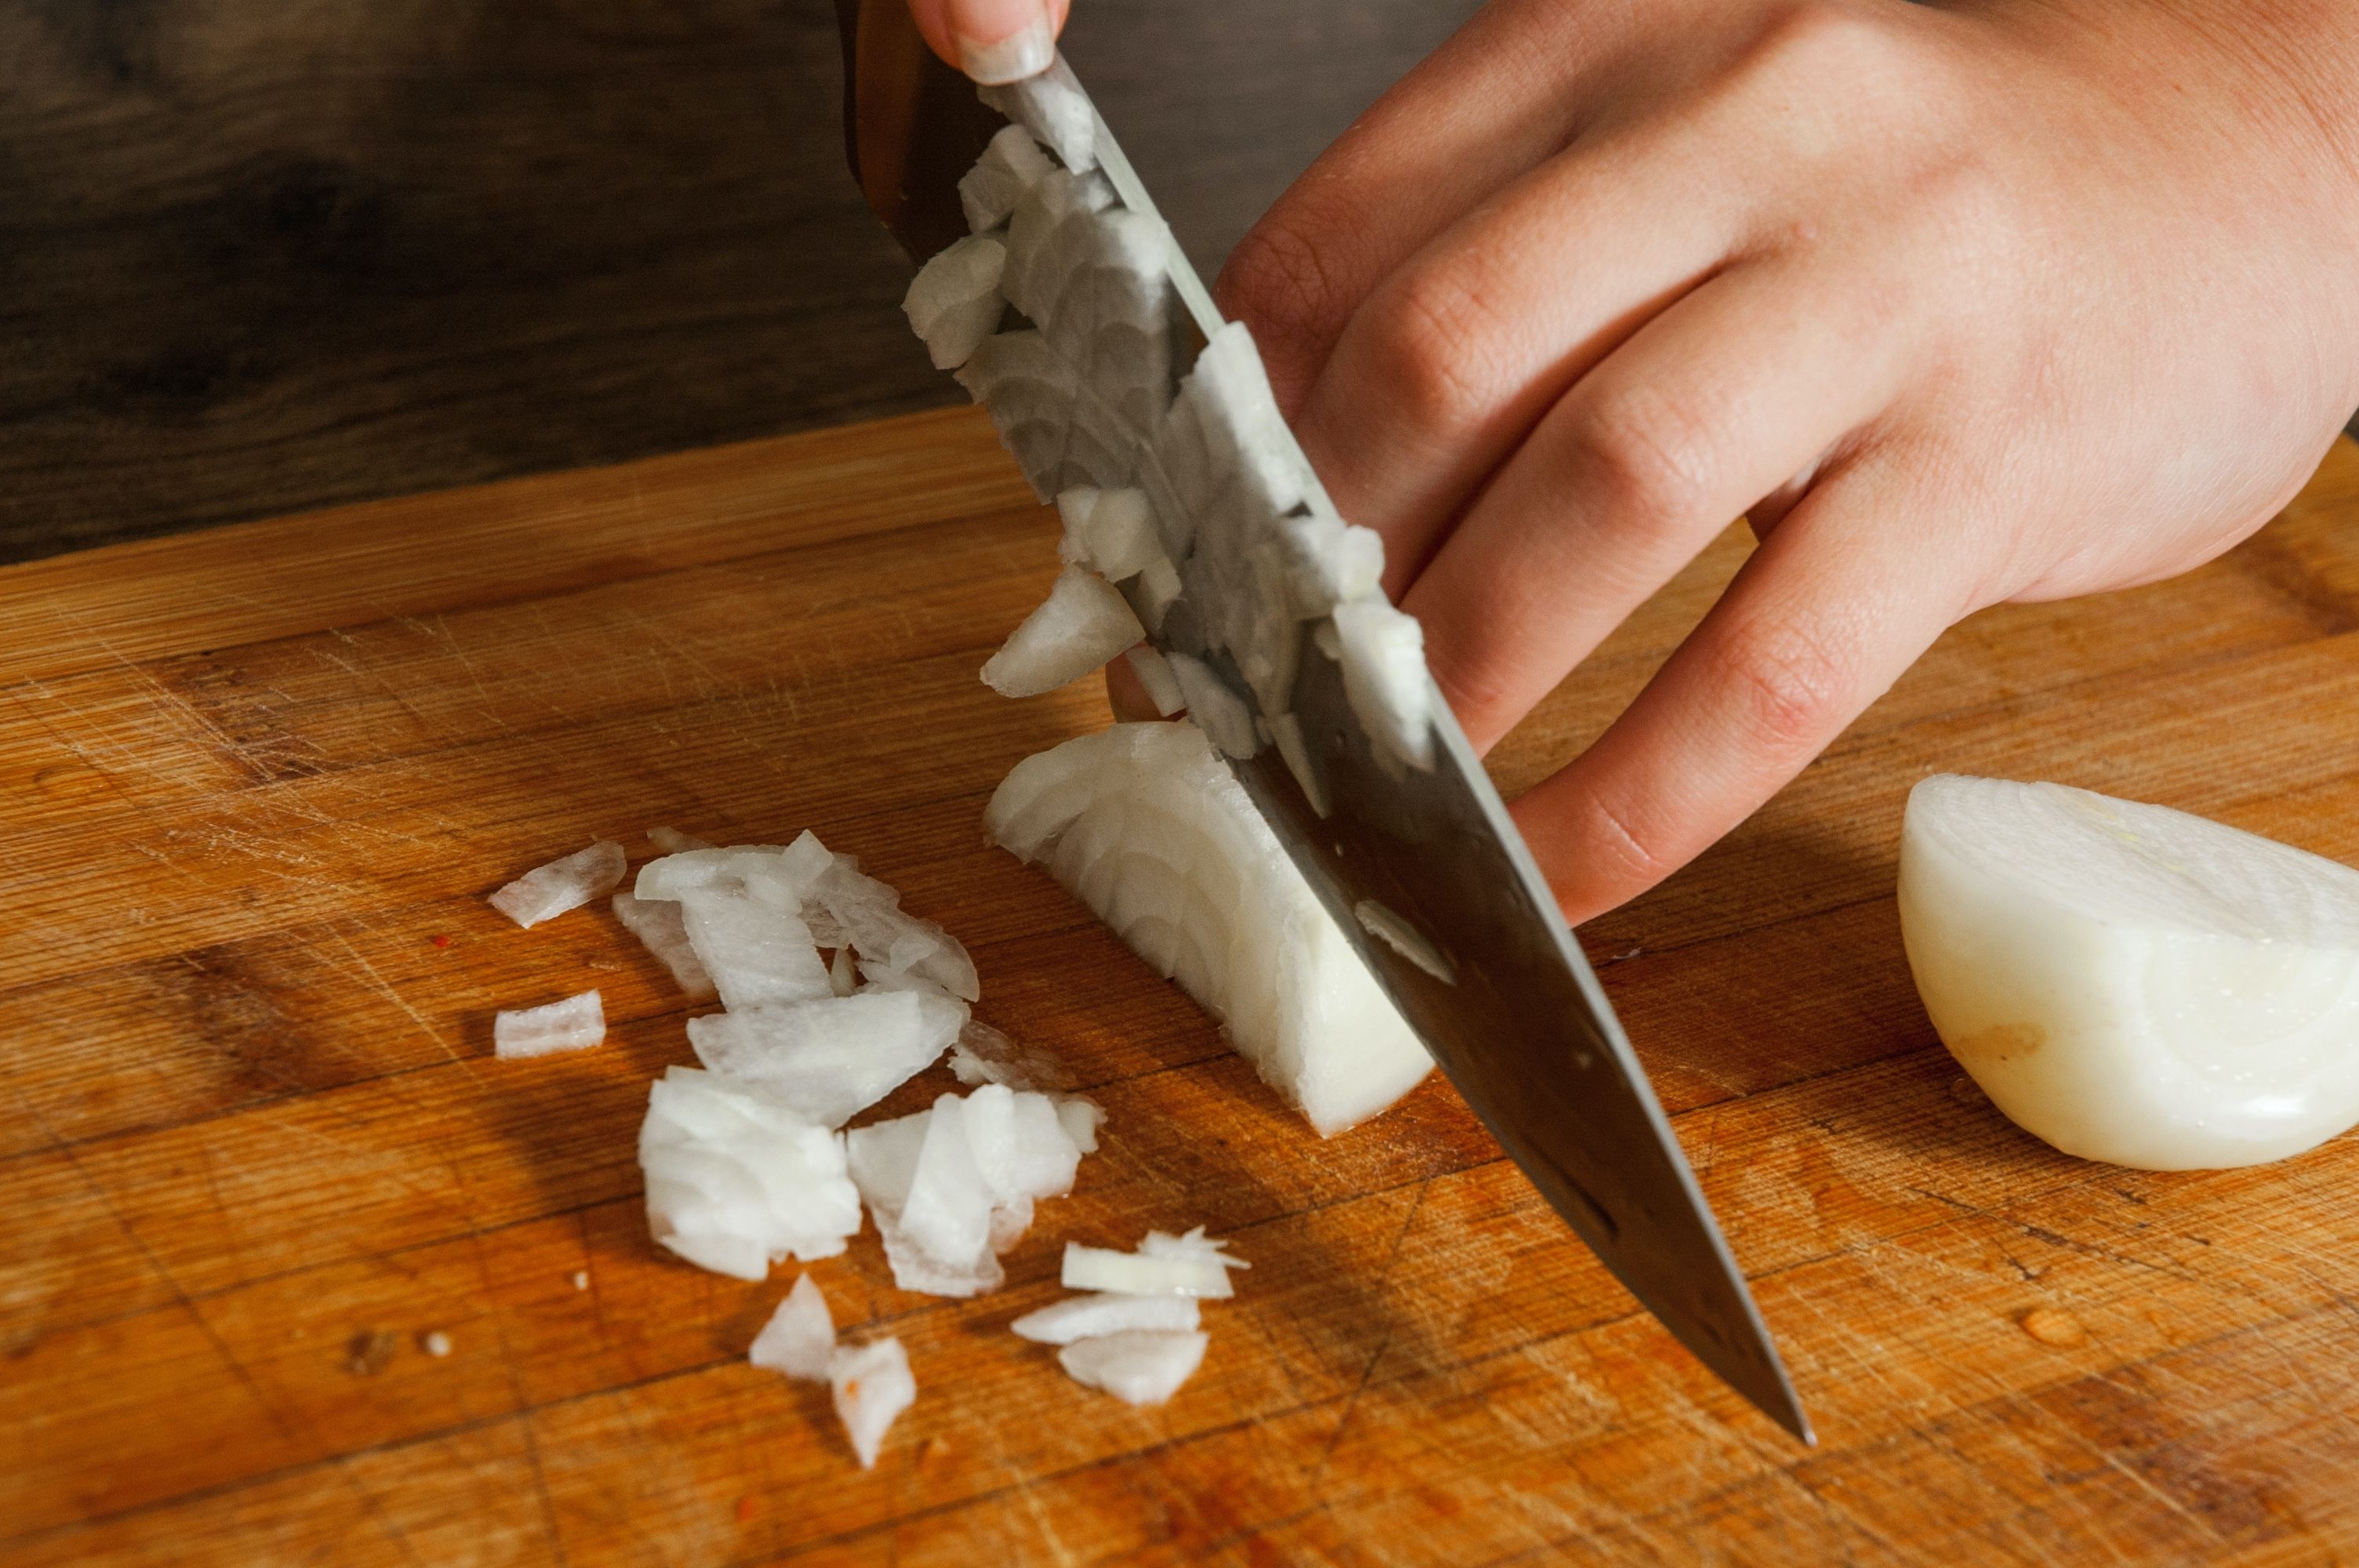 https://hips.hearstapps.com/hmg-prod/images/how-to-cut-onions-without-crying-1654033455.jpg